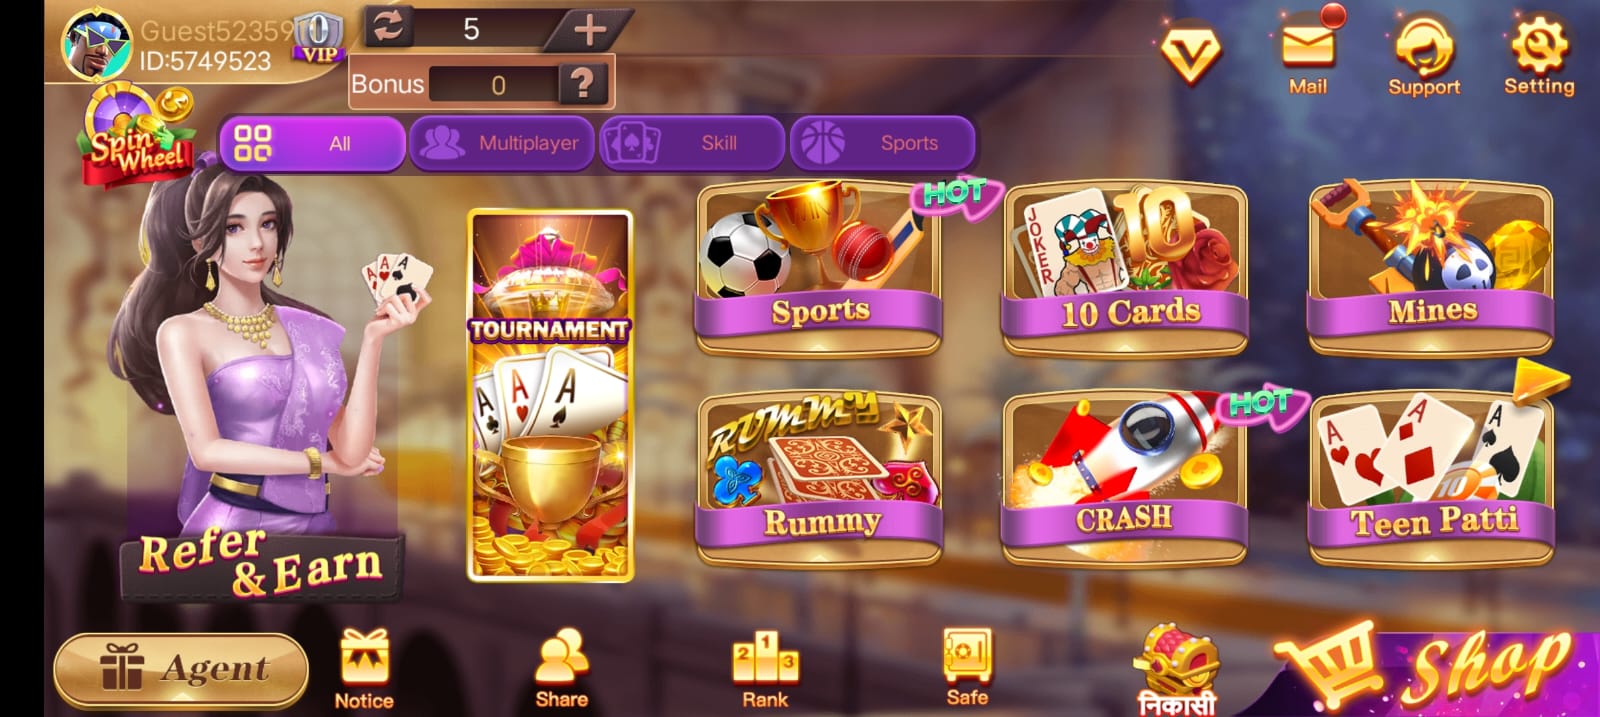 Available Games on Teen Patti Royal Apk